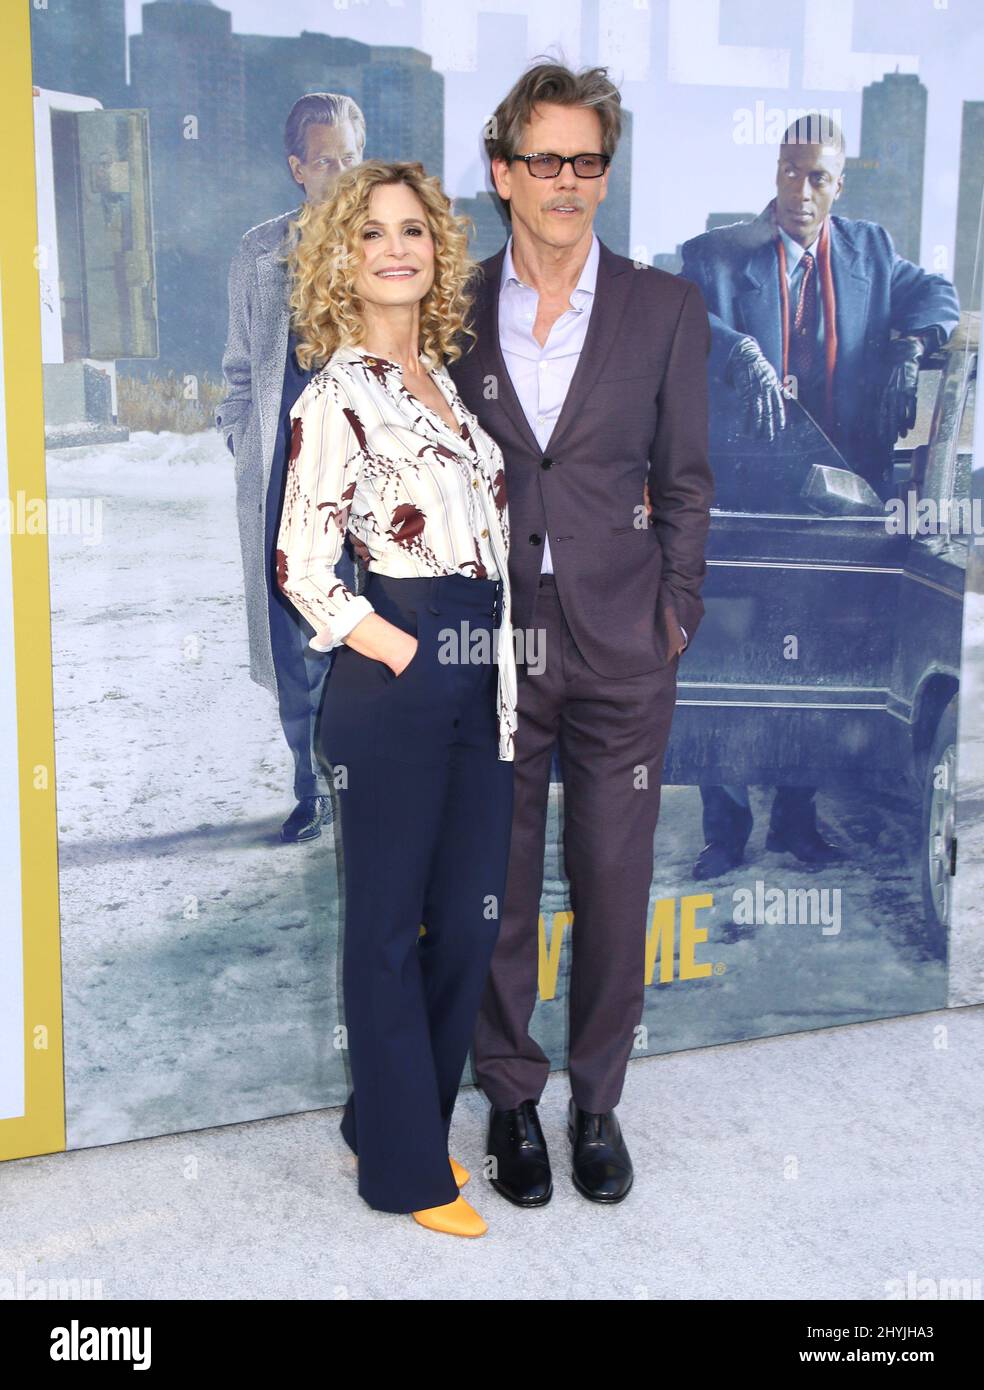 Kyra Sedgwick & Kevin Bacon bei der Premiere von Showtime's City on A Hill in New York Stockfoto